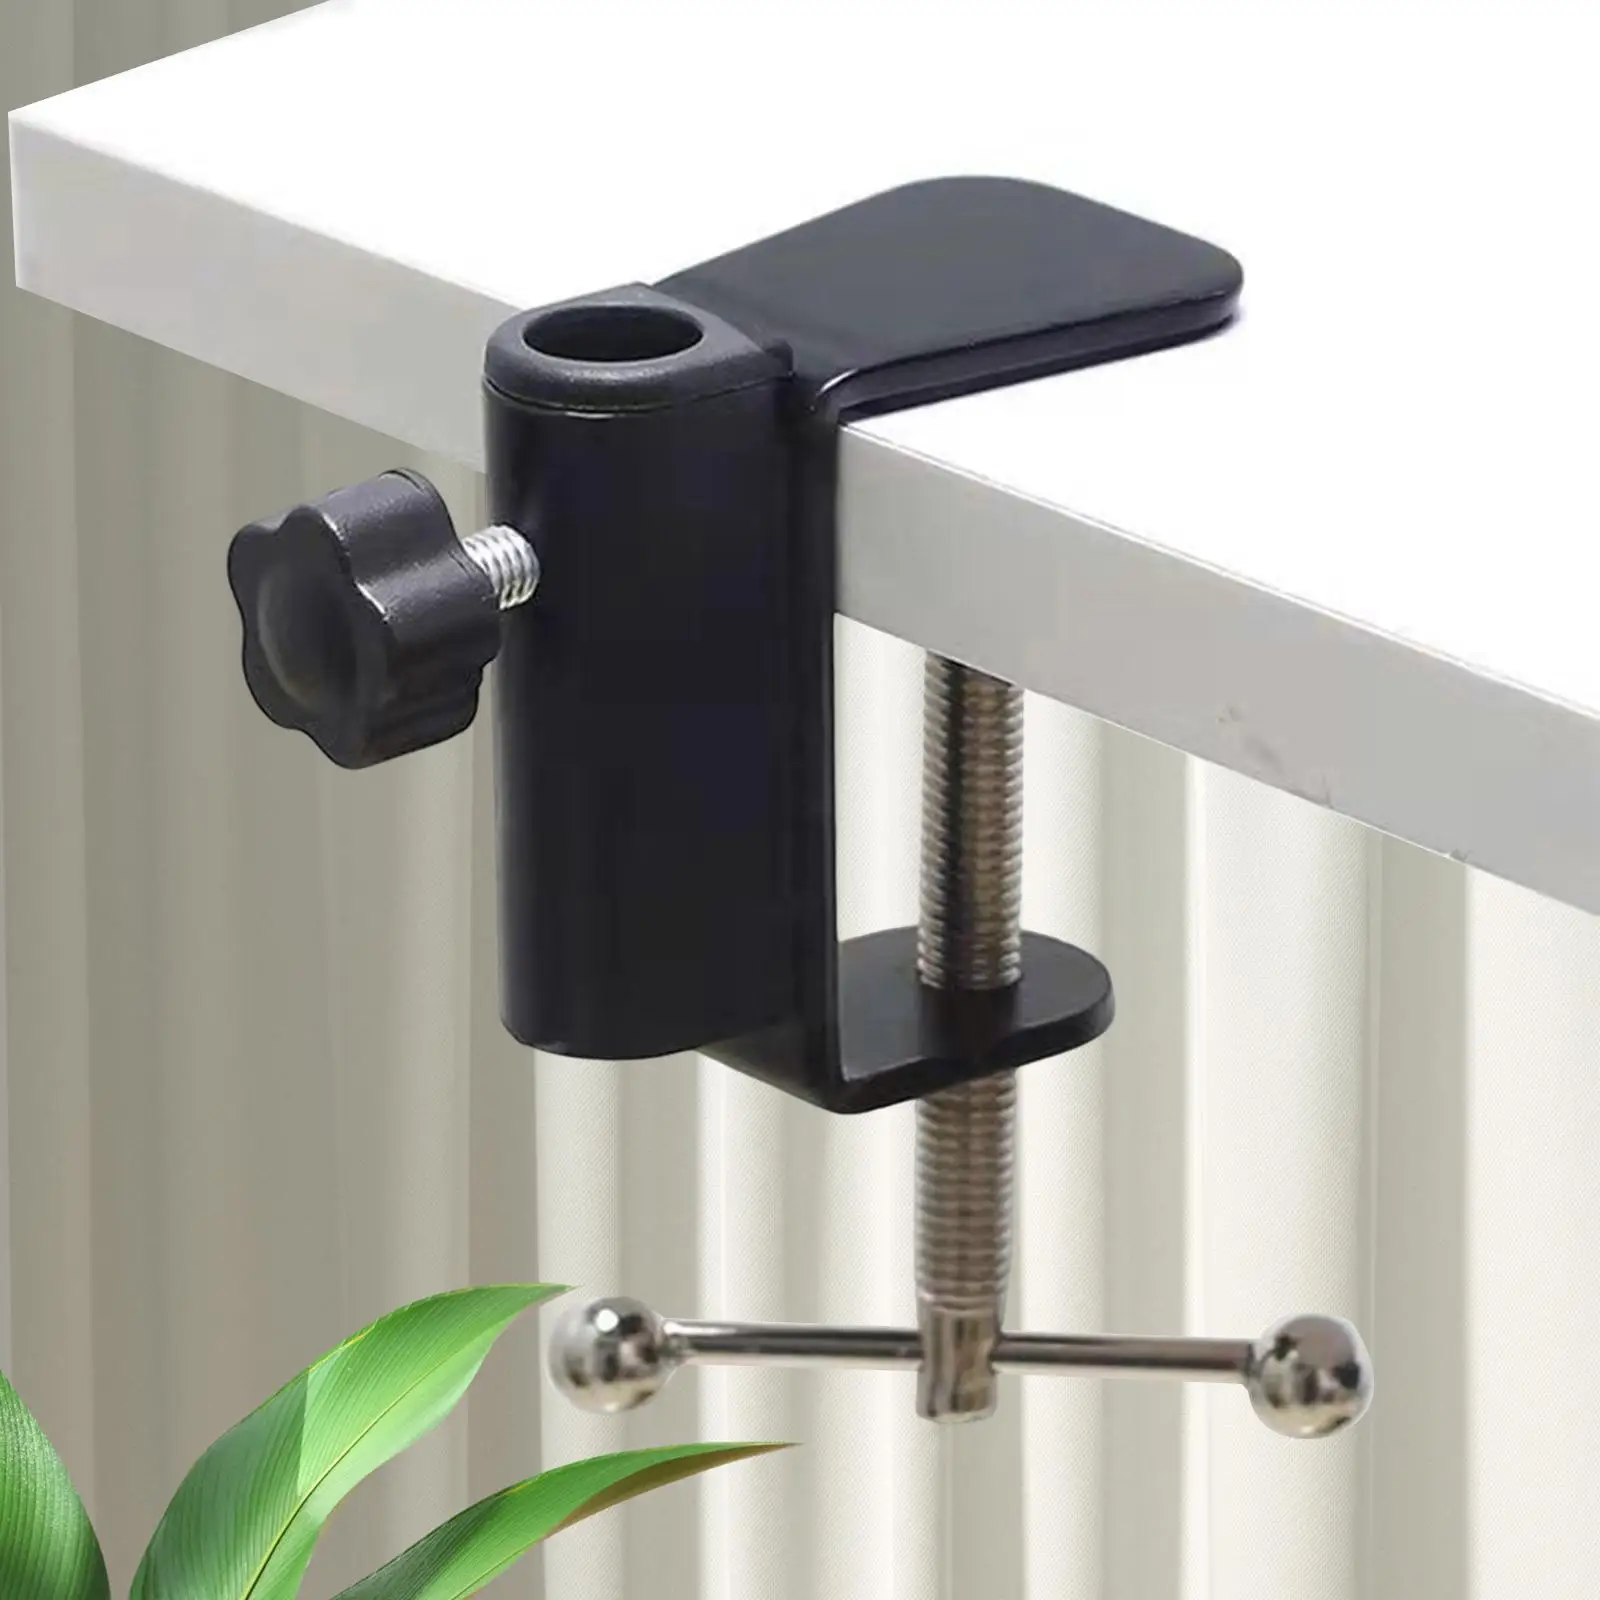 Desk Mount Clamp Rustproof Metal Construction Anti Slip Fits up to 1.77inch/4.5cm Thickness clip Clamp Holder for Mic Stand